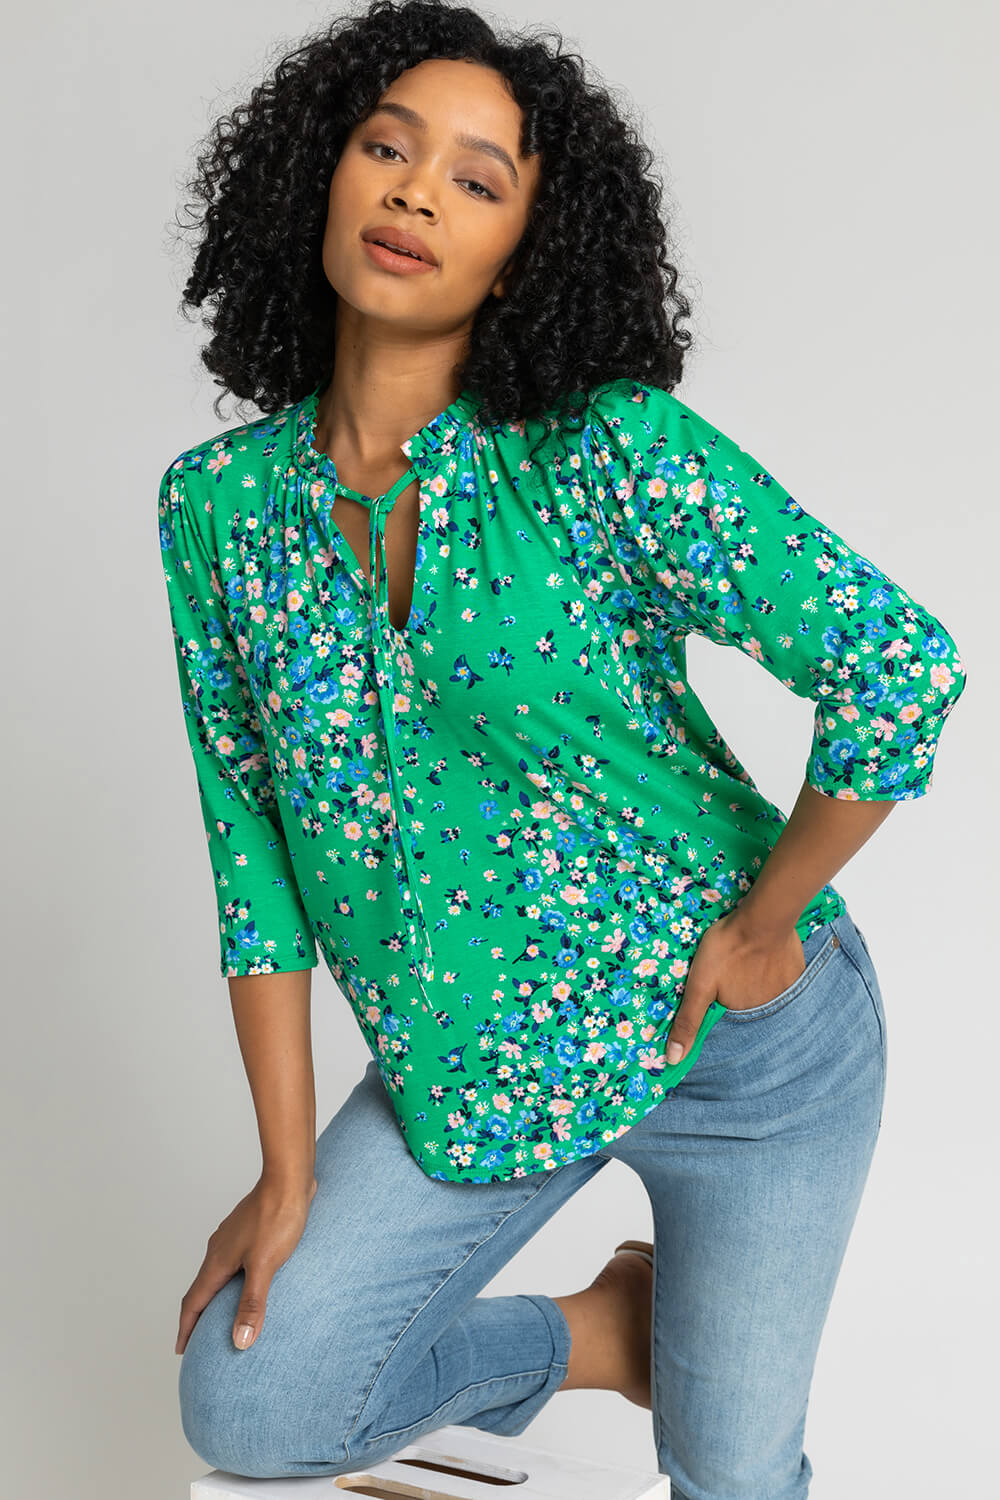 Green Petite Floral Print Tie Neck Top, Image 5 of 5